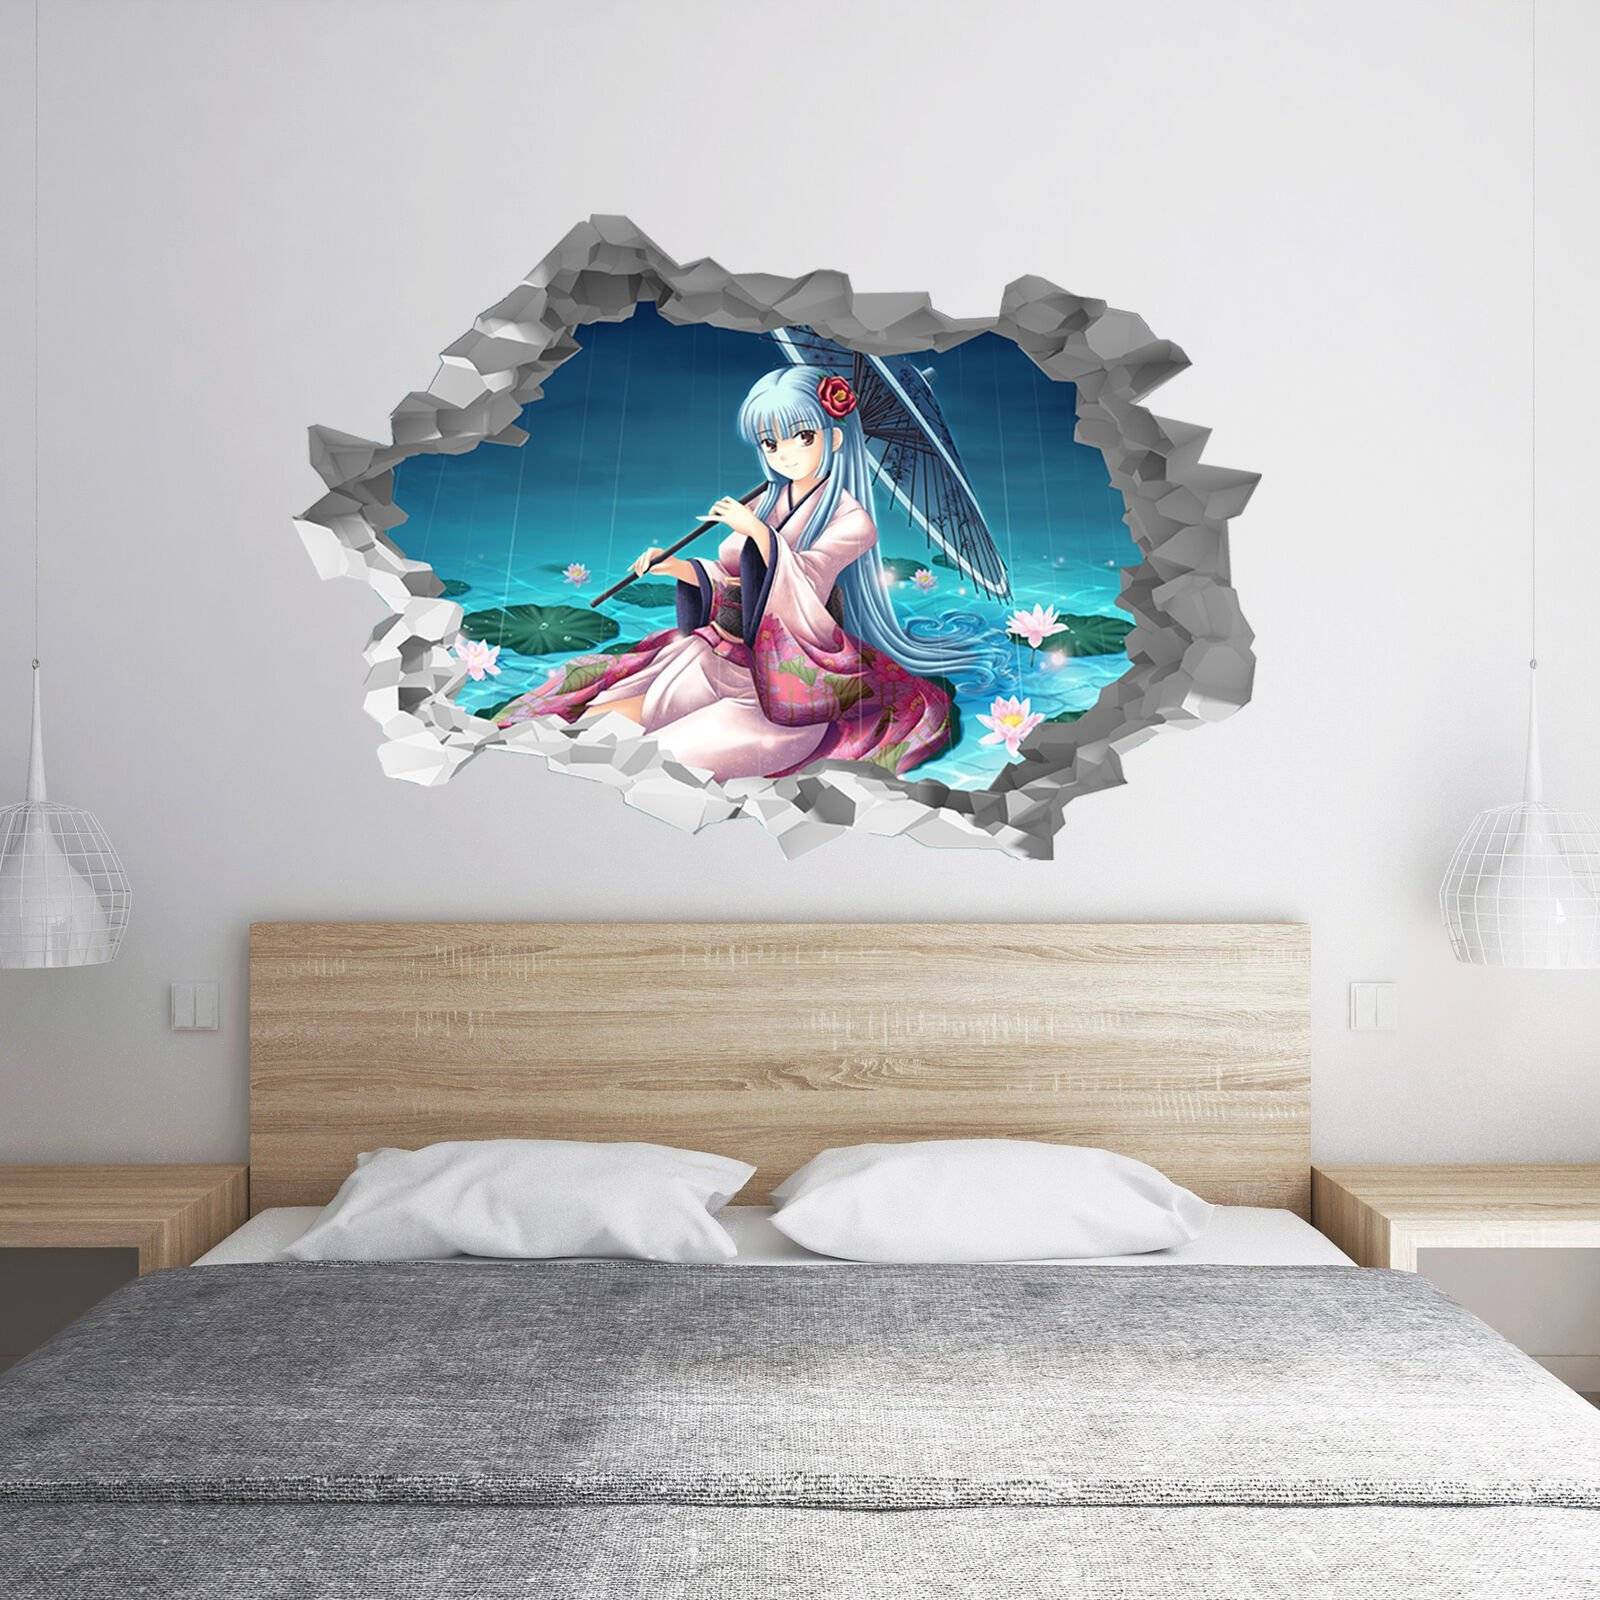 Details about   3D Klin Work I32 Japan Anime Wall Stickers Wall Mural Decals Acmy 